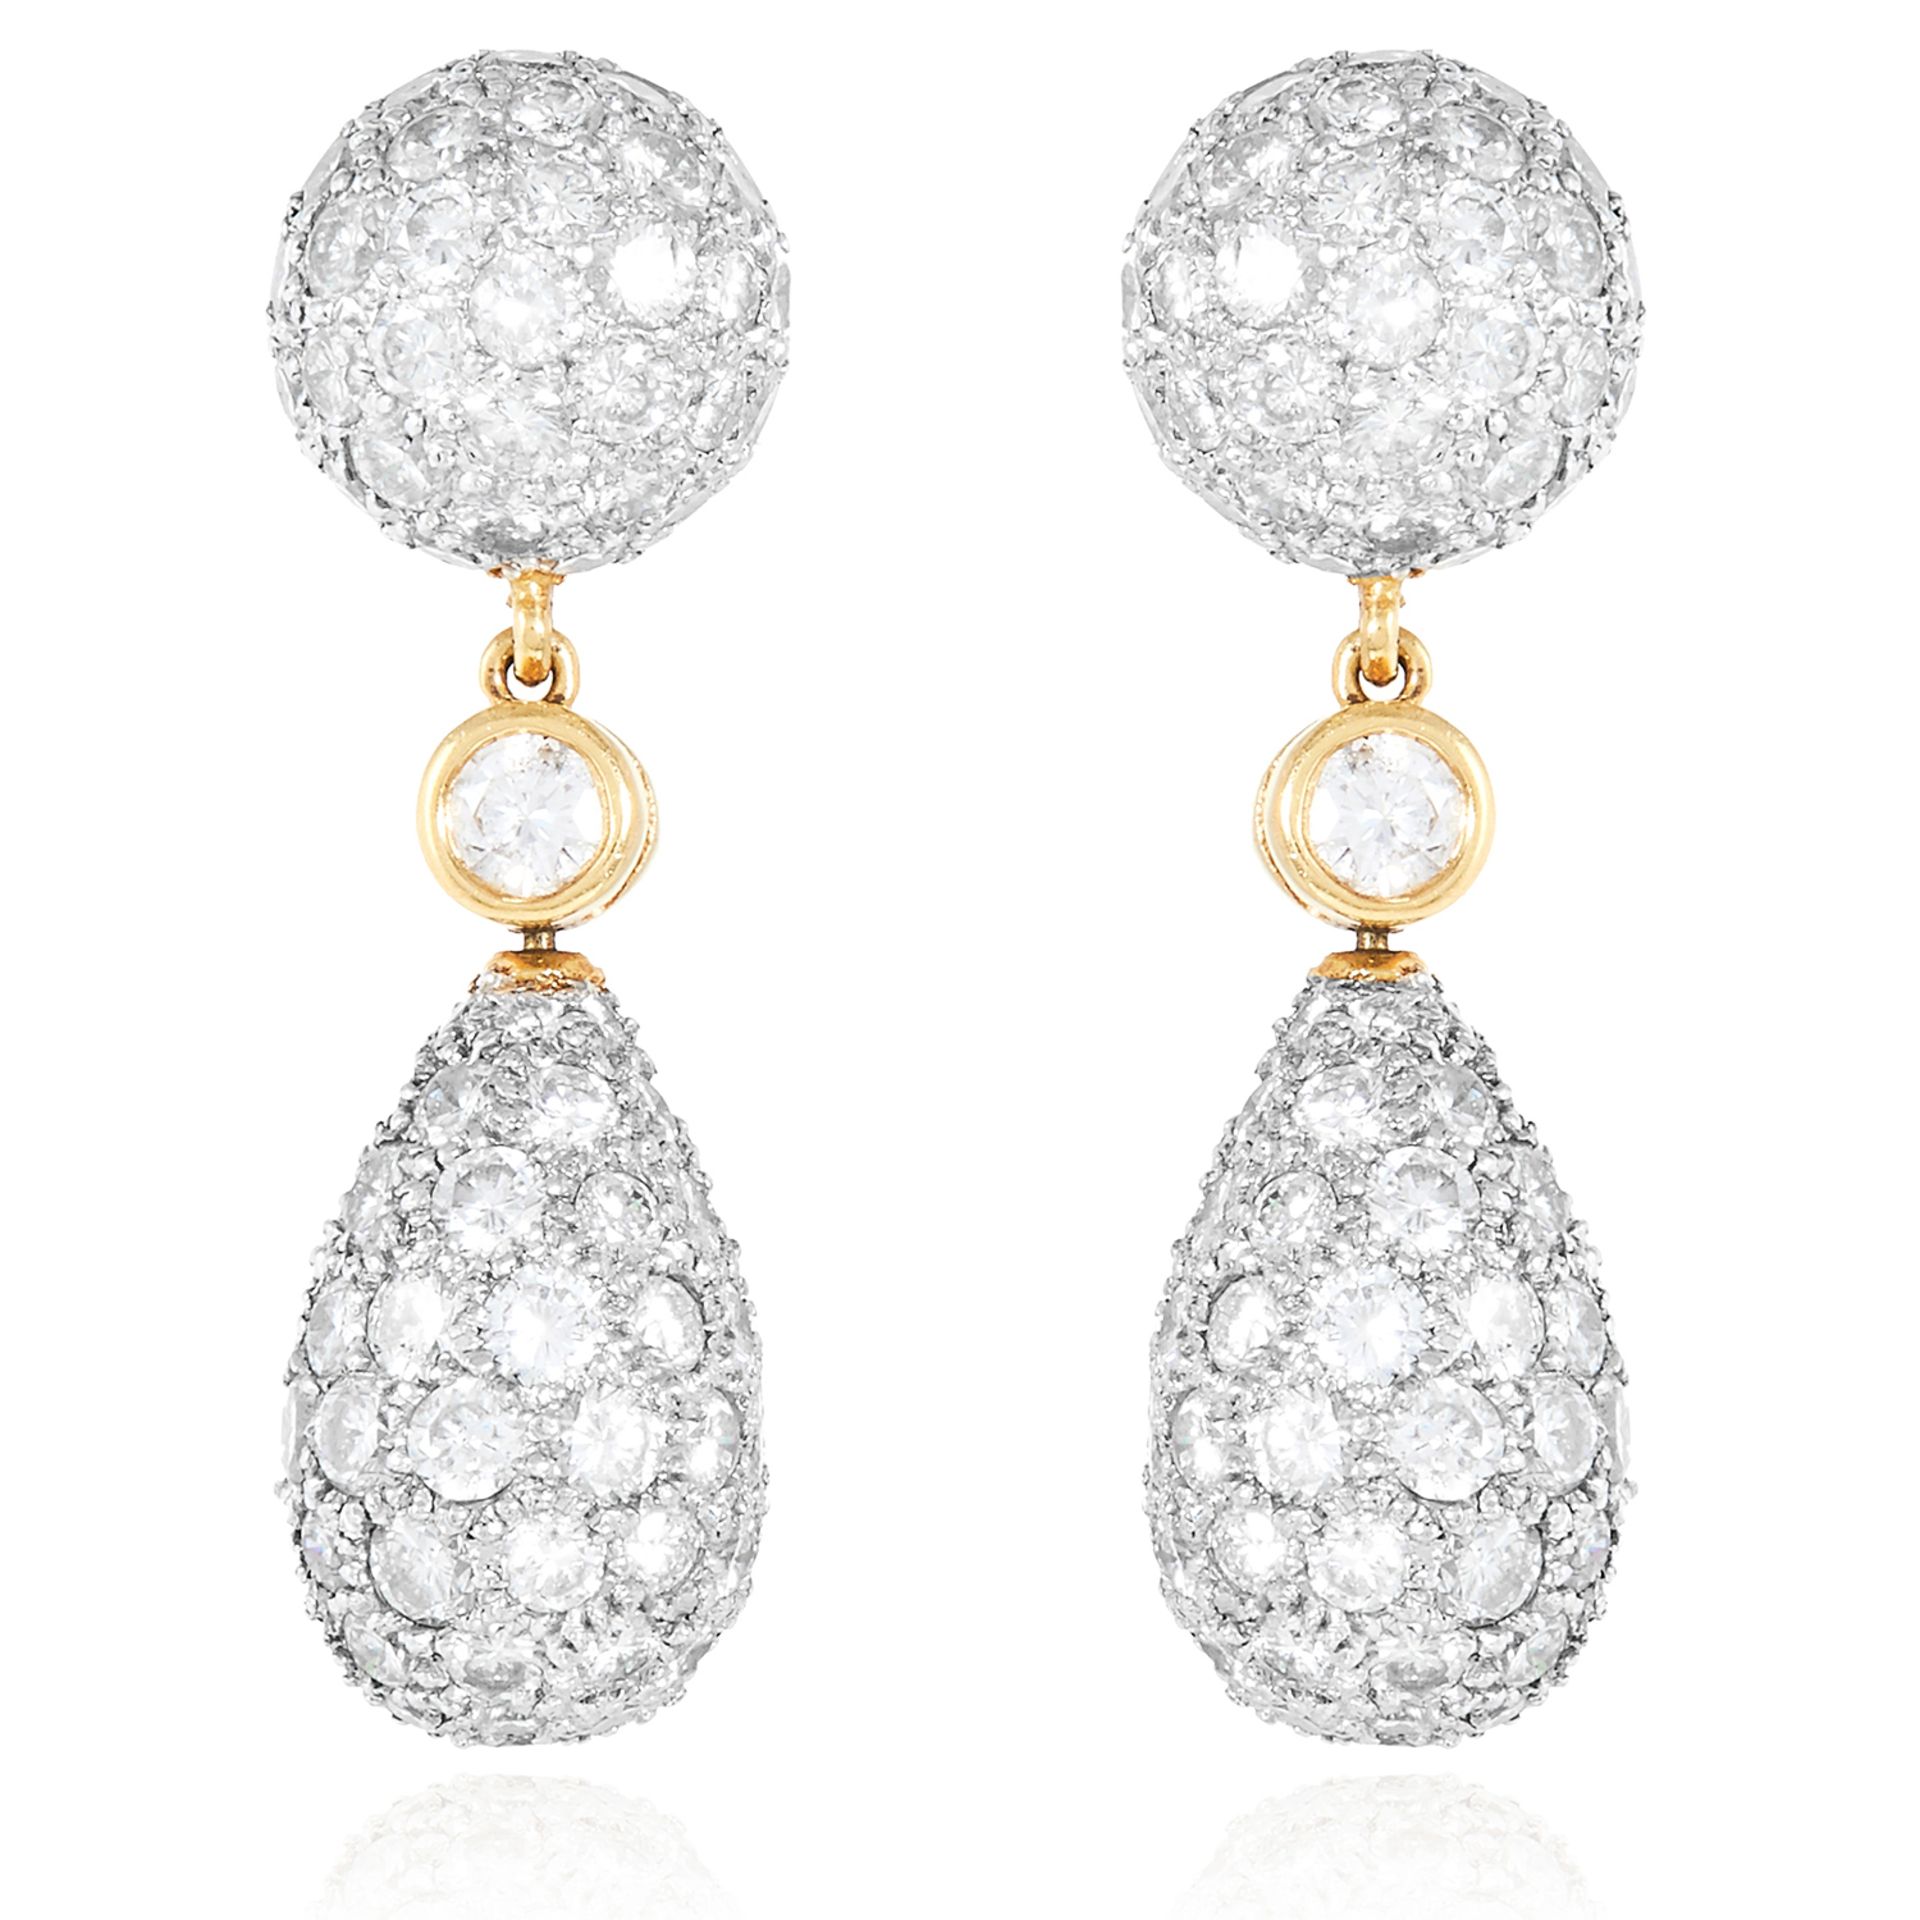 A PAIR OF DIAMOND EARRINGS in 18ct yellow gold, each comprising of a circular bead suspending a tear